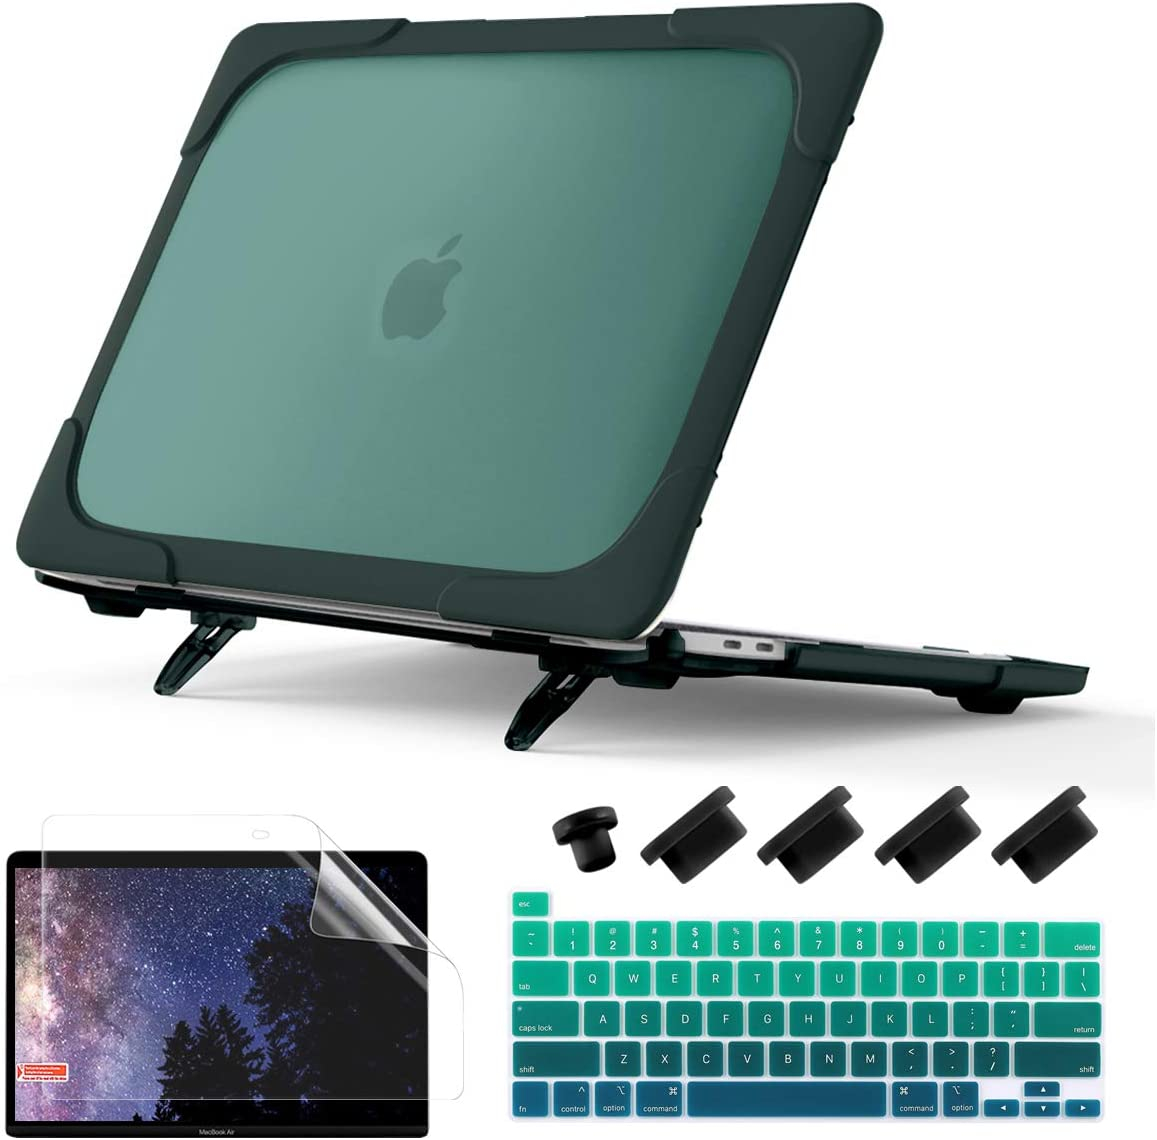 Batianda Hard Case for MacBook Pro 13 2020 Release A2338 M1/A2289/A2251 Printing Rubberized Hard Shell Case Cover+Keyboard Cover Forest Screen Protector for NewMacBook Pro 13 Inch Touch Bar 